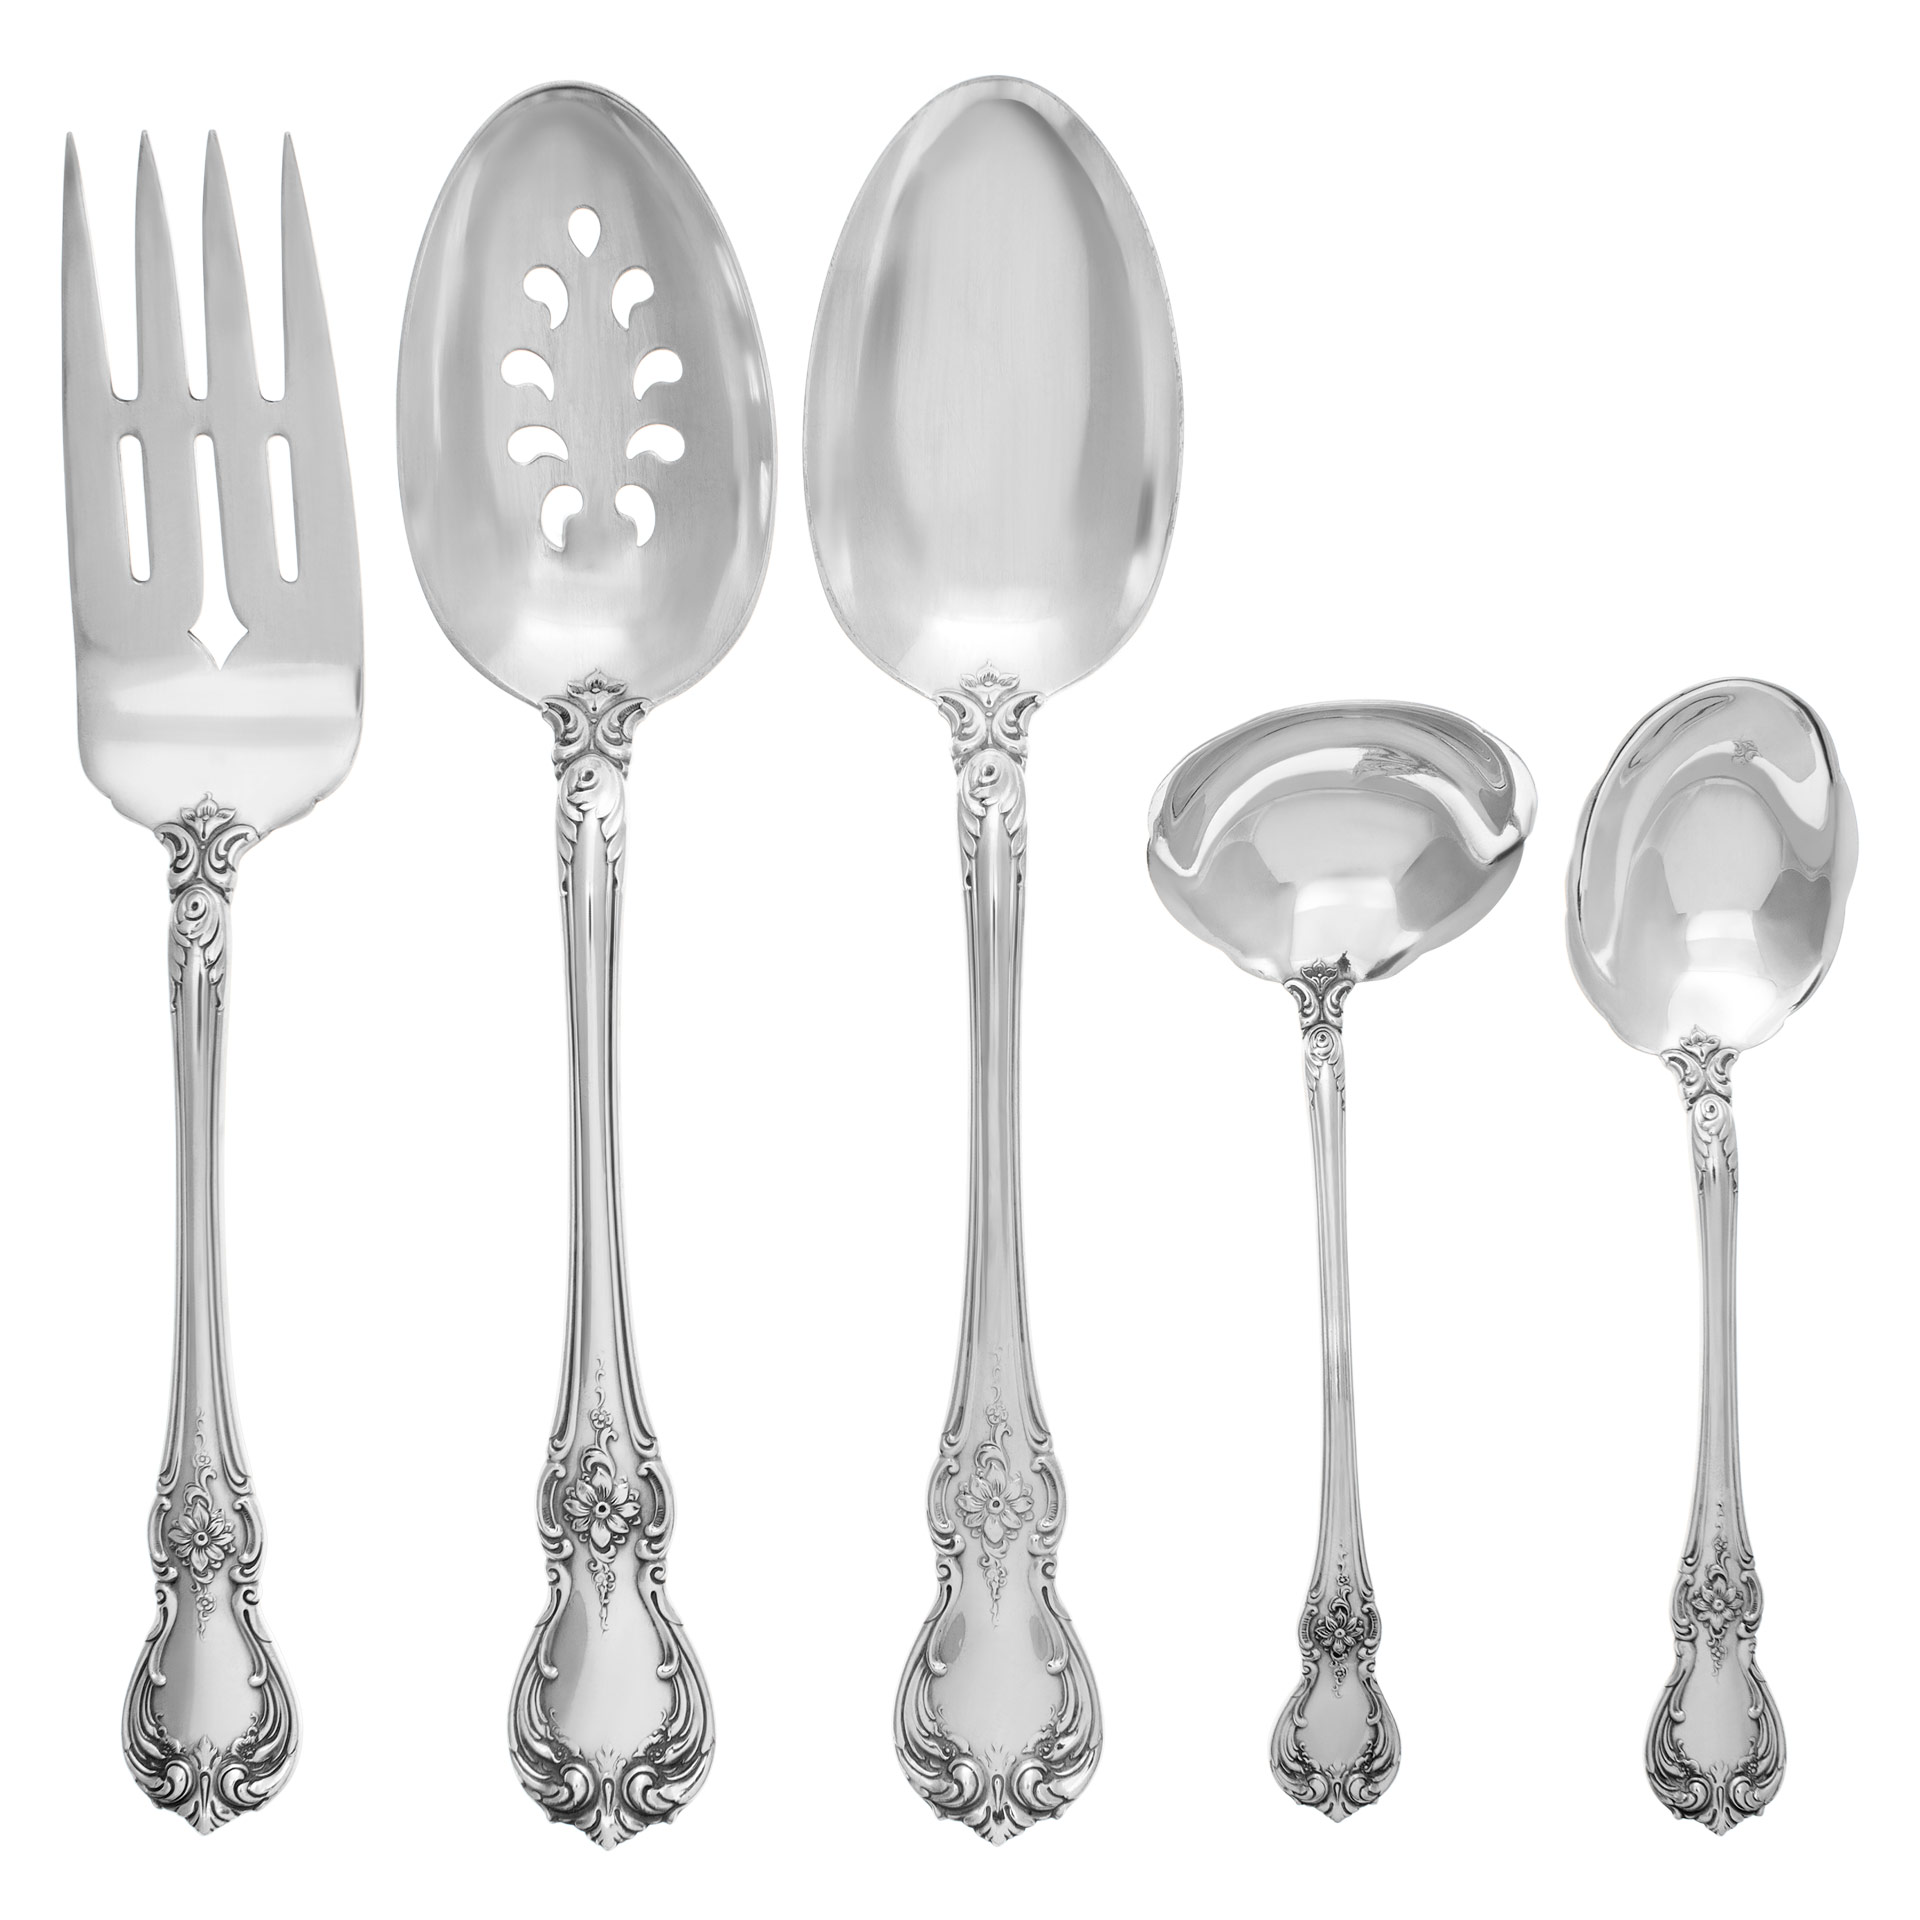 "OLD MASTER" Sterling Silver Flatware Set, Ptd in 1942  by Towle Silversmiths. 128 PIECES TOTAL- 6 Place Settings for 20 (xtra) + 7 Serving Pieces- 162 ounces troy of .925  Sterling Silver.TOTAL 139 pieces. image 3